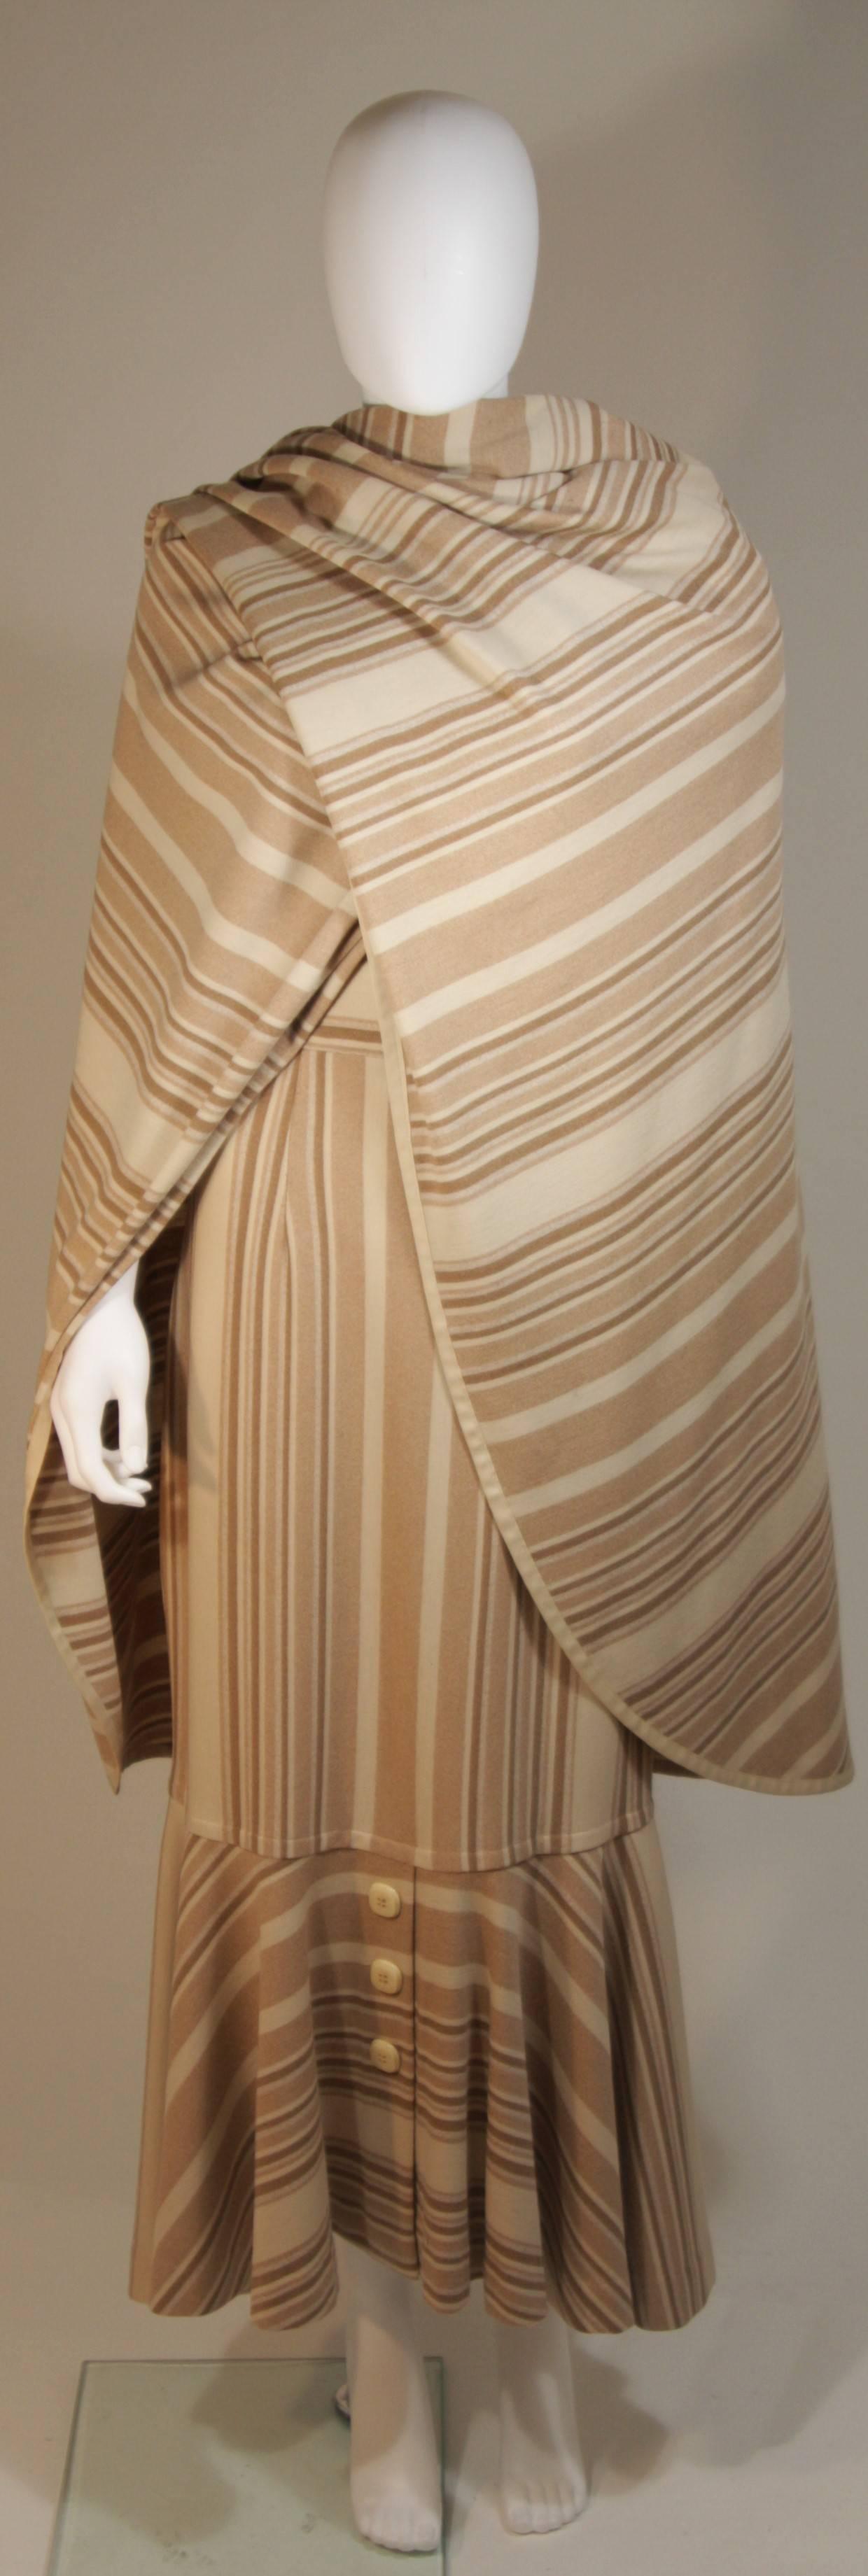 Custom Cream & Nude Wool Cape and Skirt Ensemble Size 6-10 In Excellent Condition For Sale In Los Angeles, CA